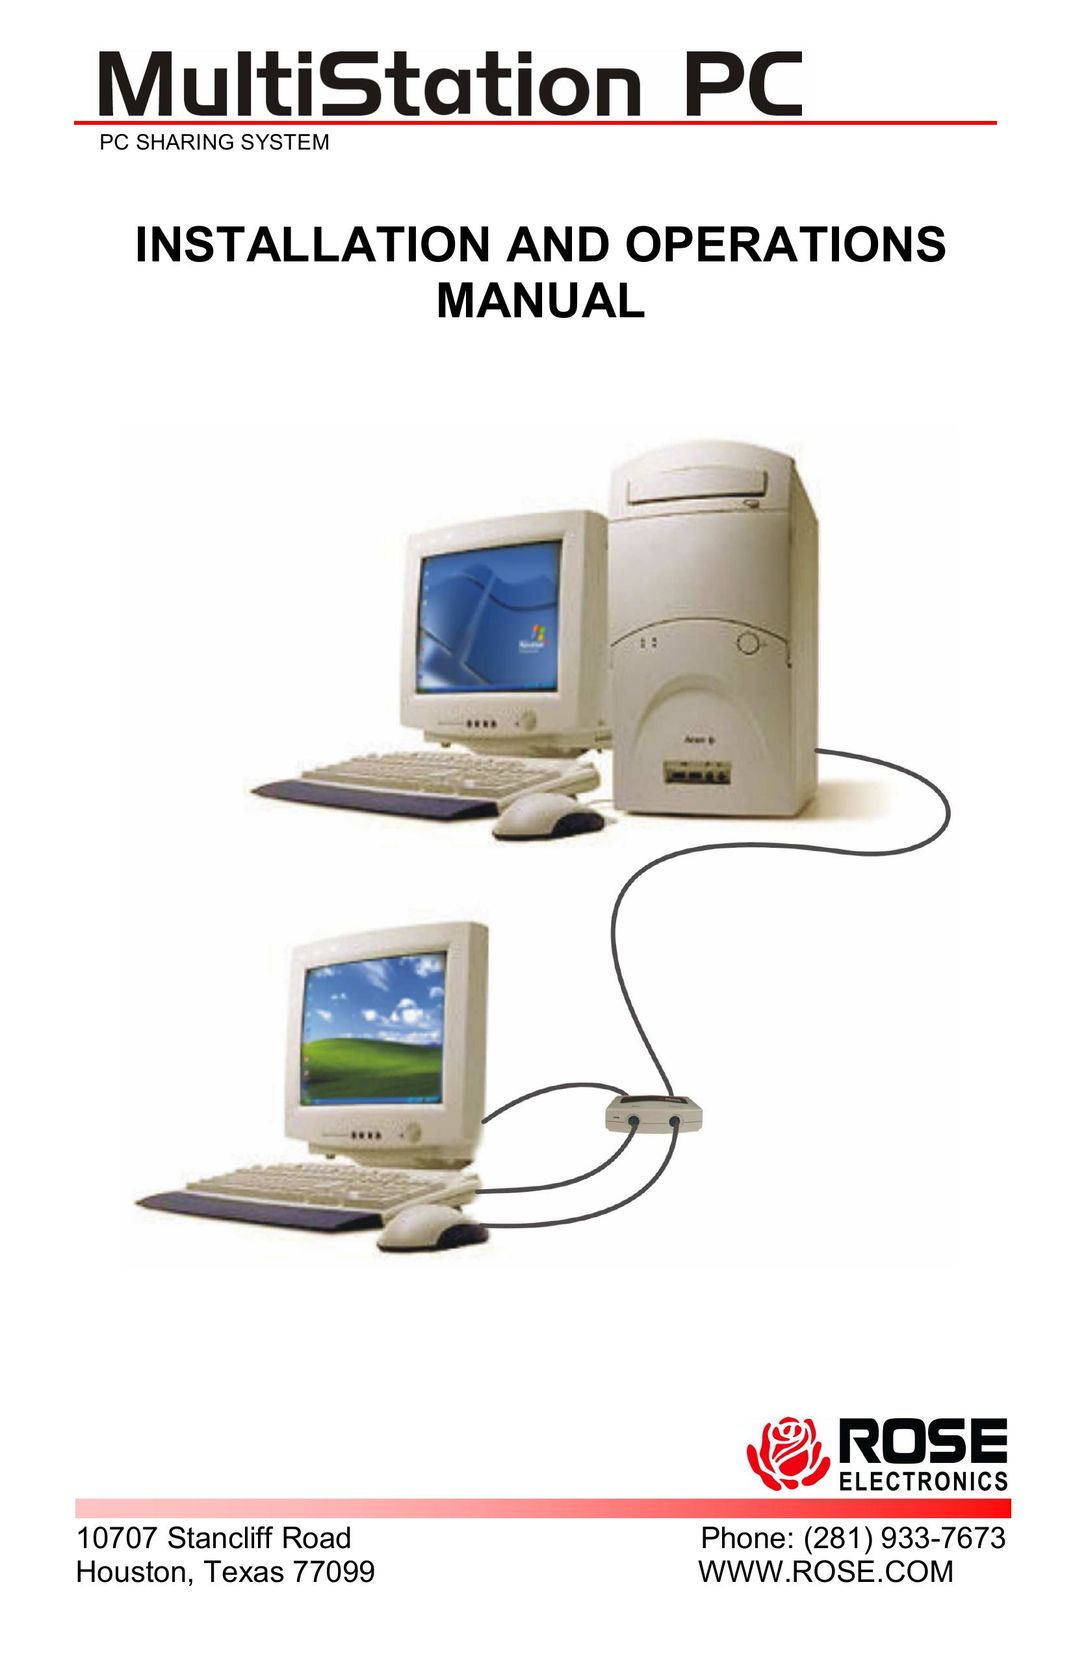 Rose electronic MultiStation Personal Computer User Manual